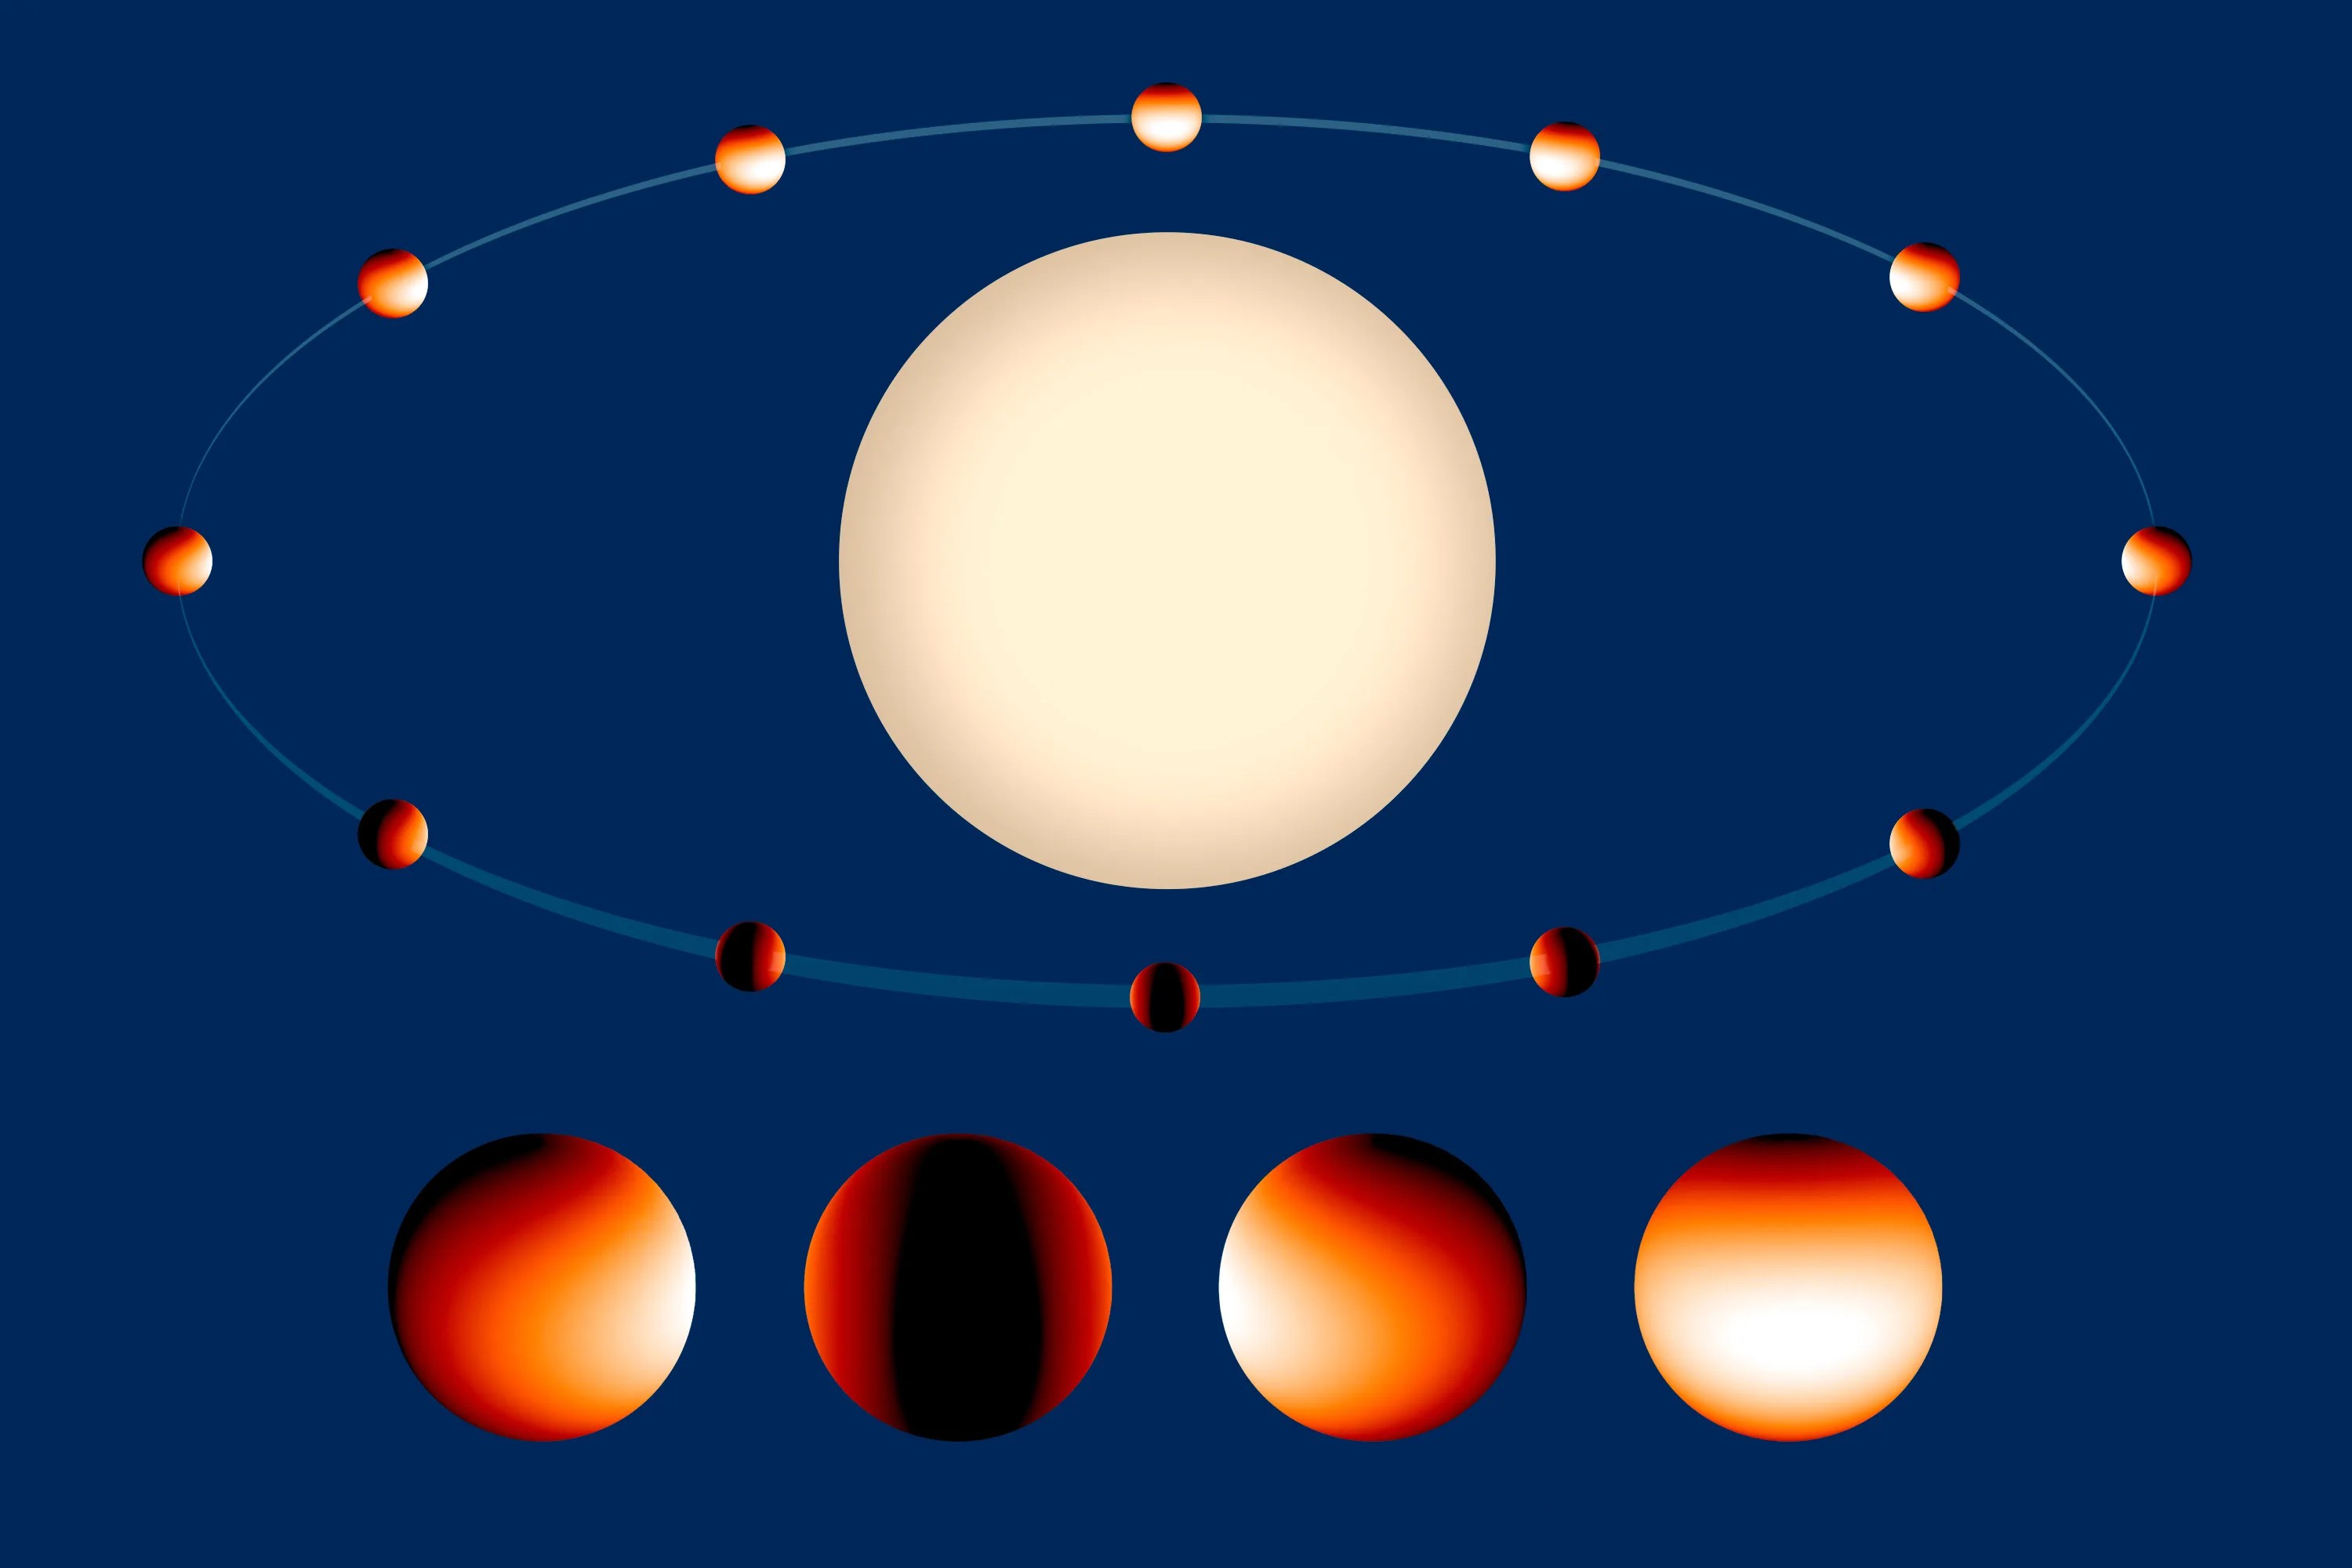 Top two-thirds of the image holds a bright-light-yellow star at center. Around the star is the oval orbit of the planet. Points along the orbit indicate the planet's location and temperature measurements. The bottom third of the image holds four spheres, close-ups of the individual temperature maps.